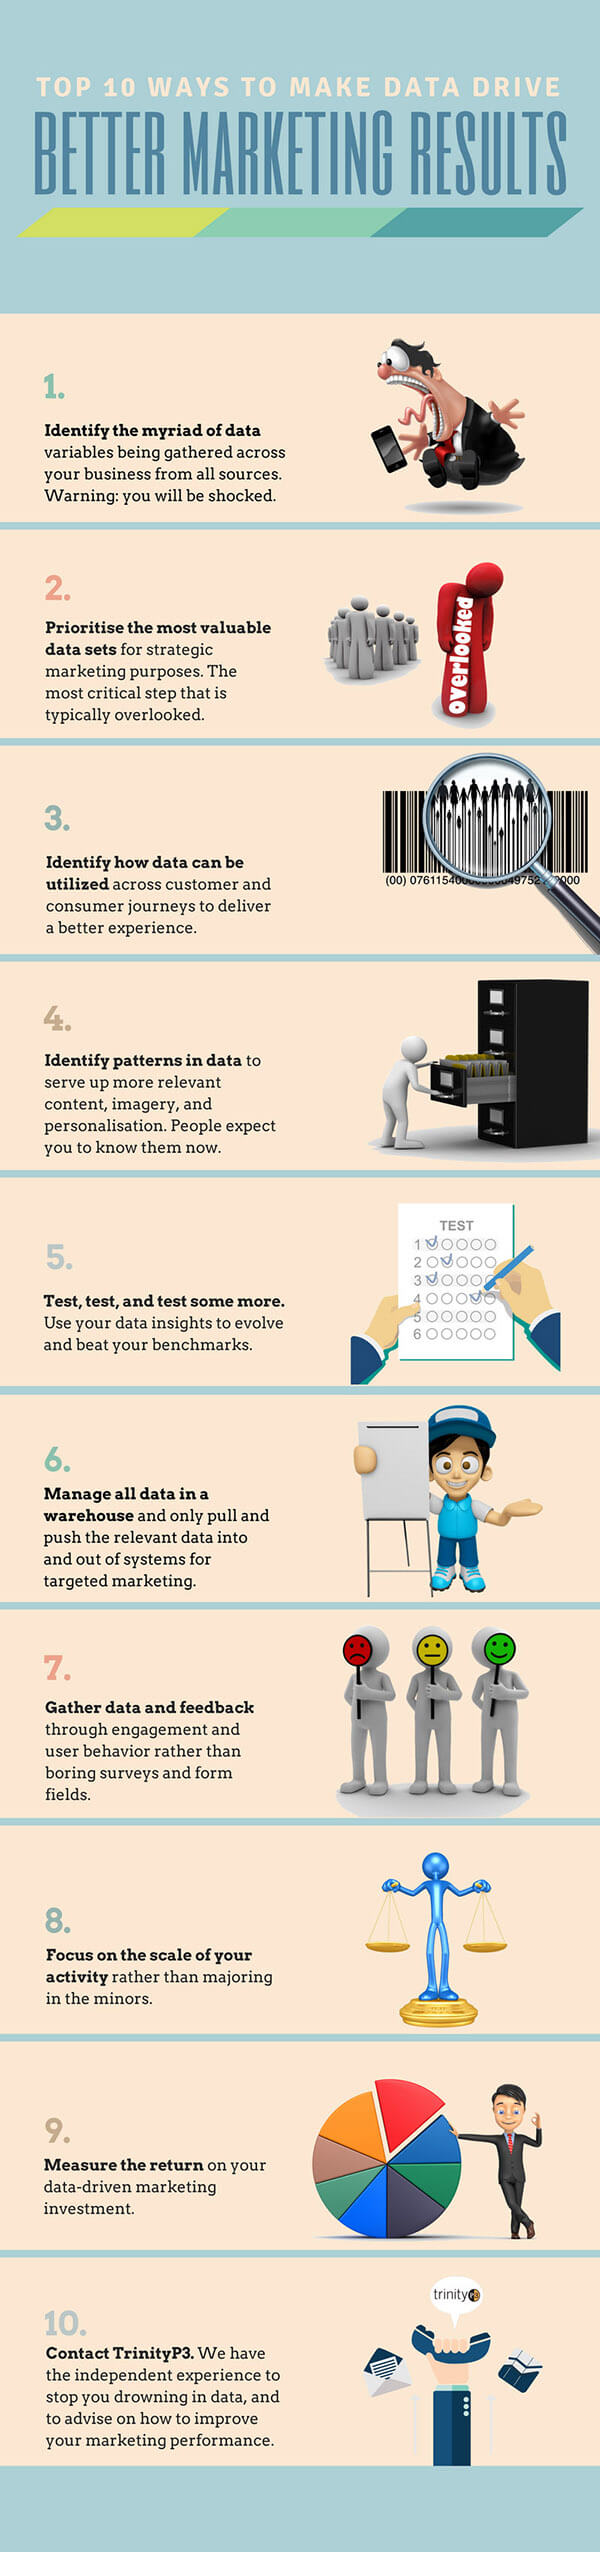 Top 10 ways to make data drive better marketing results - Infographic